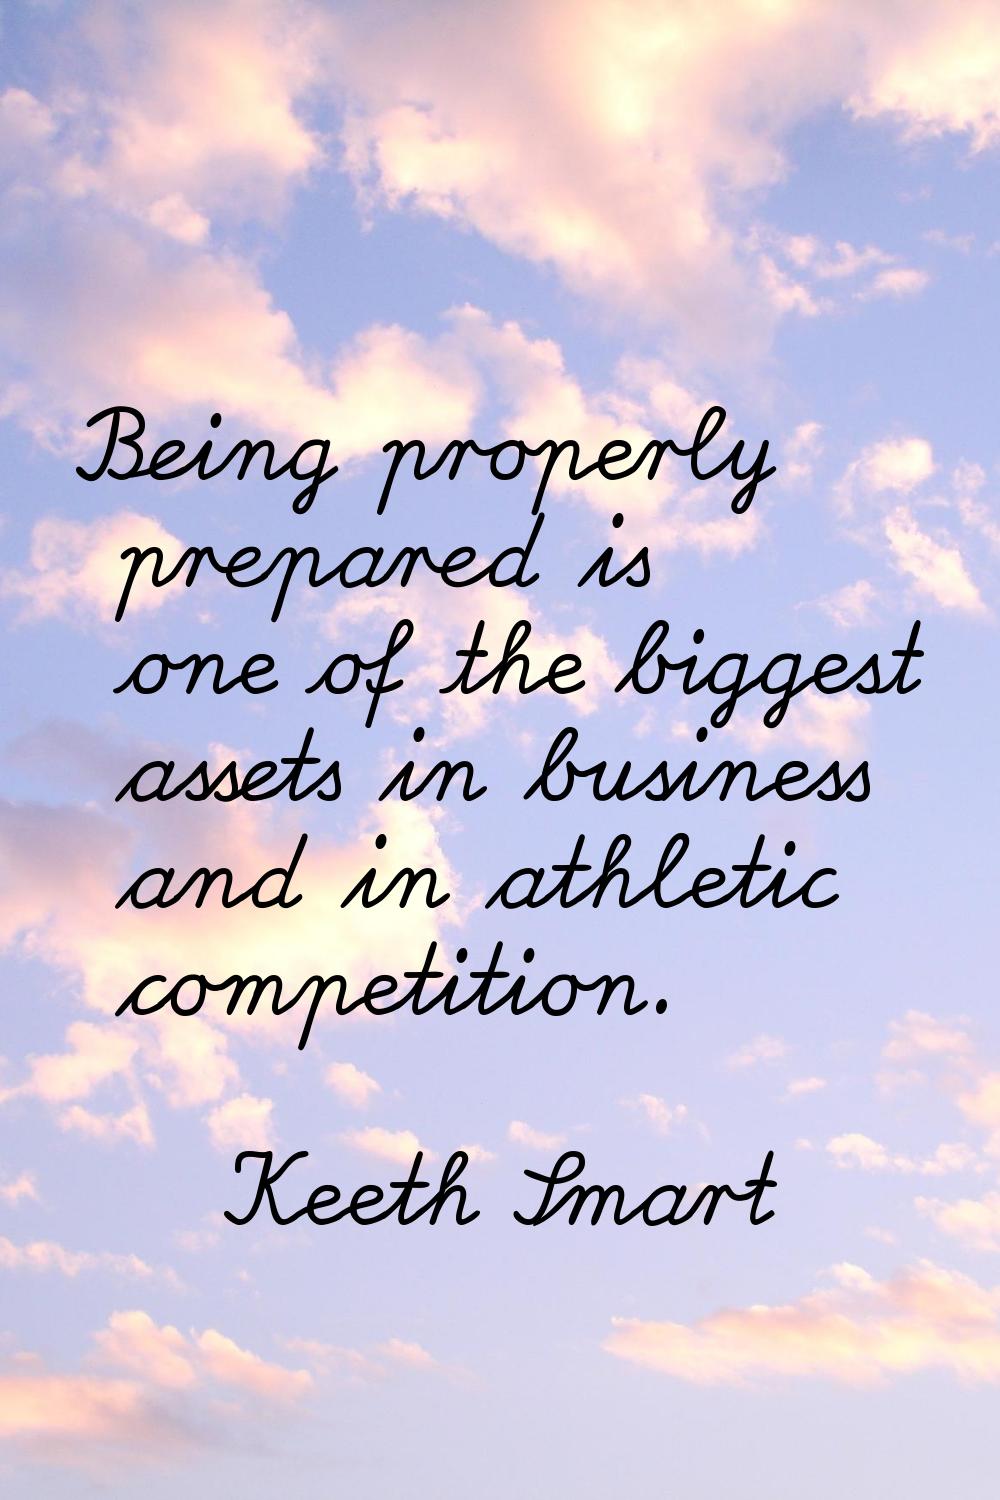 Being properly prepared is one of the biggest assets in business and in athletic competition.